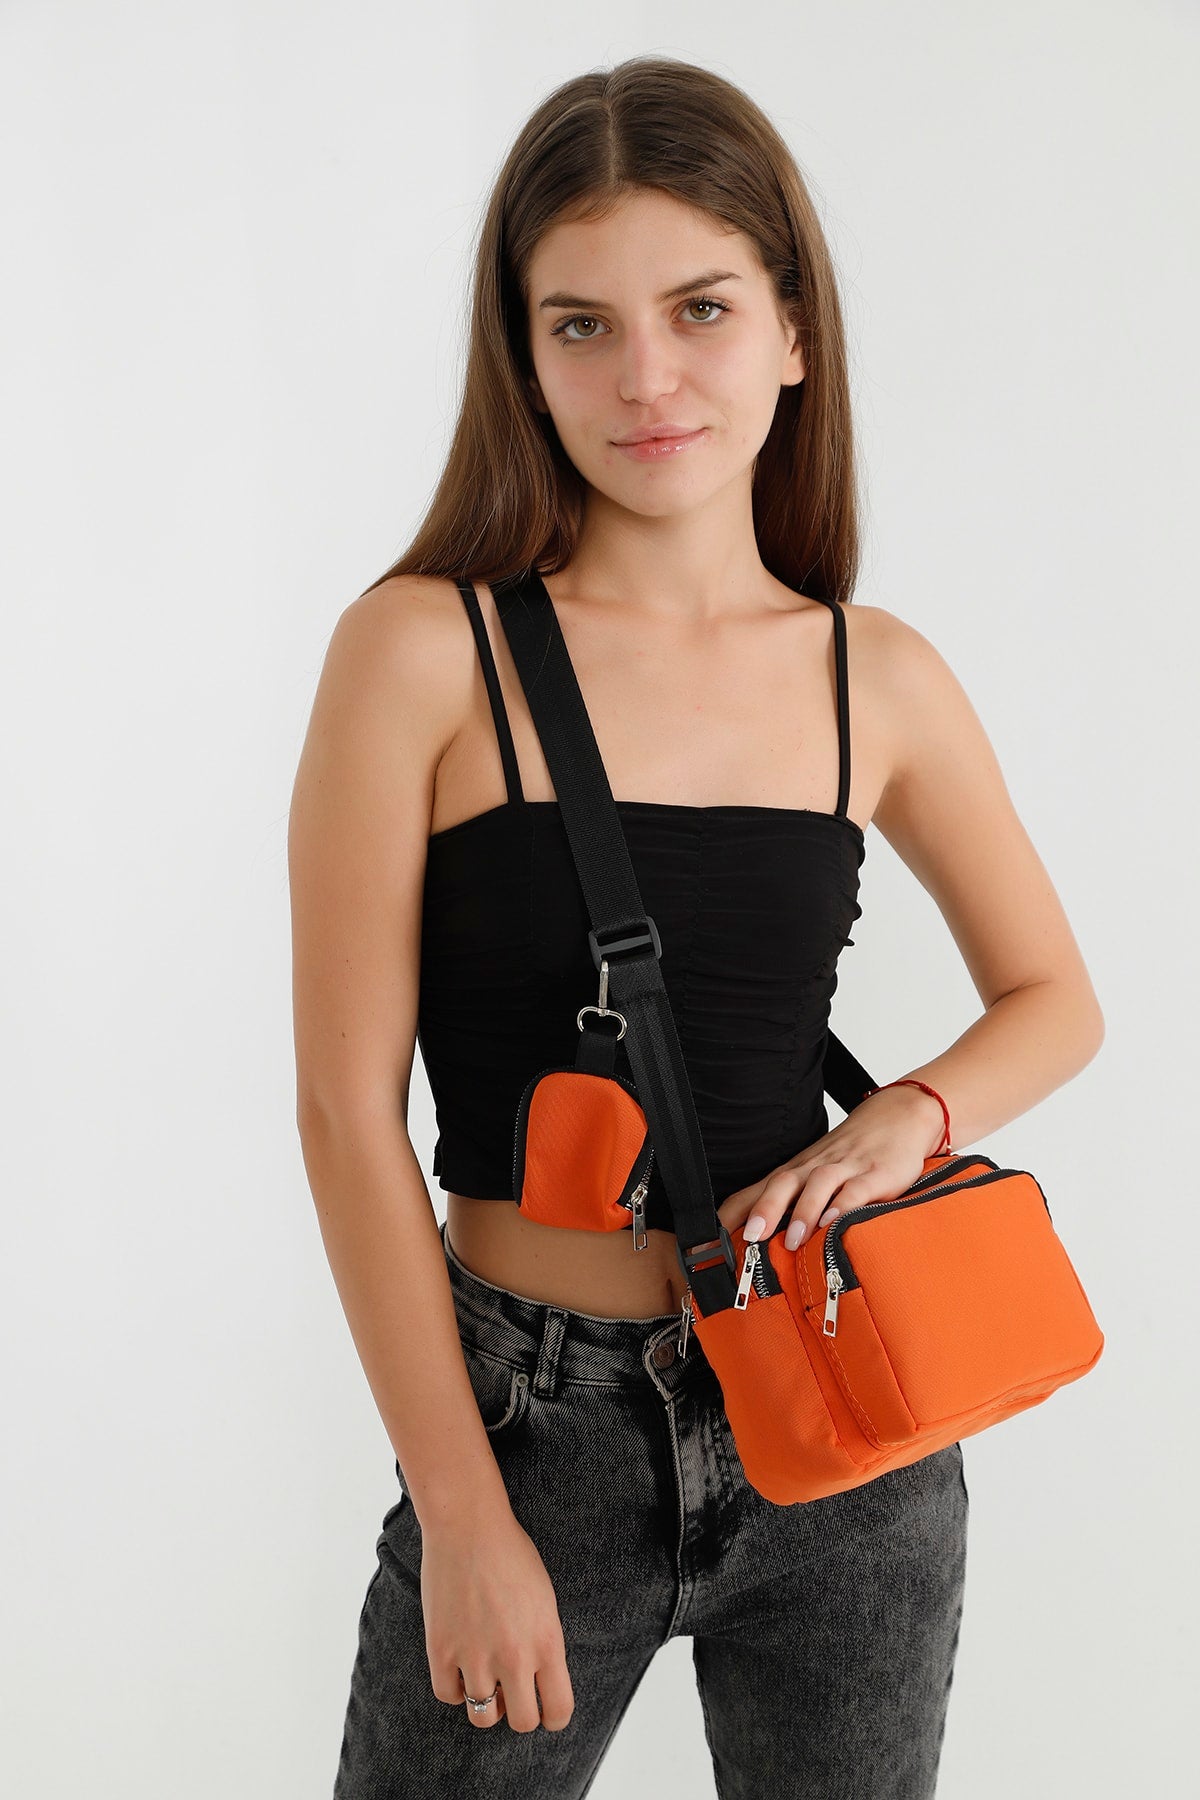 Orange U4 Canvas Women's Cross Shoulder Bag With 2 Compartments And Wallet With Adjustable Strap B:17 E:22 G:1